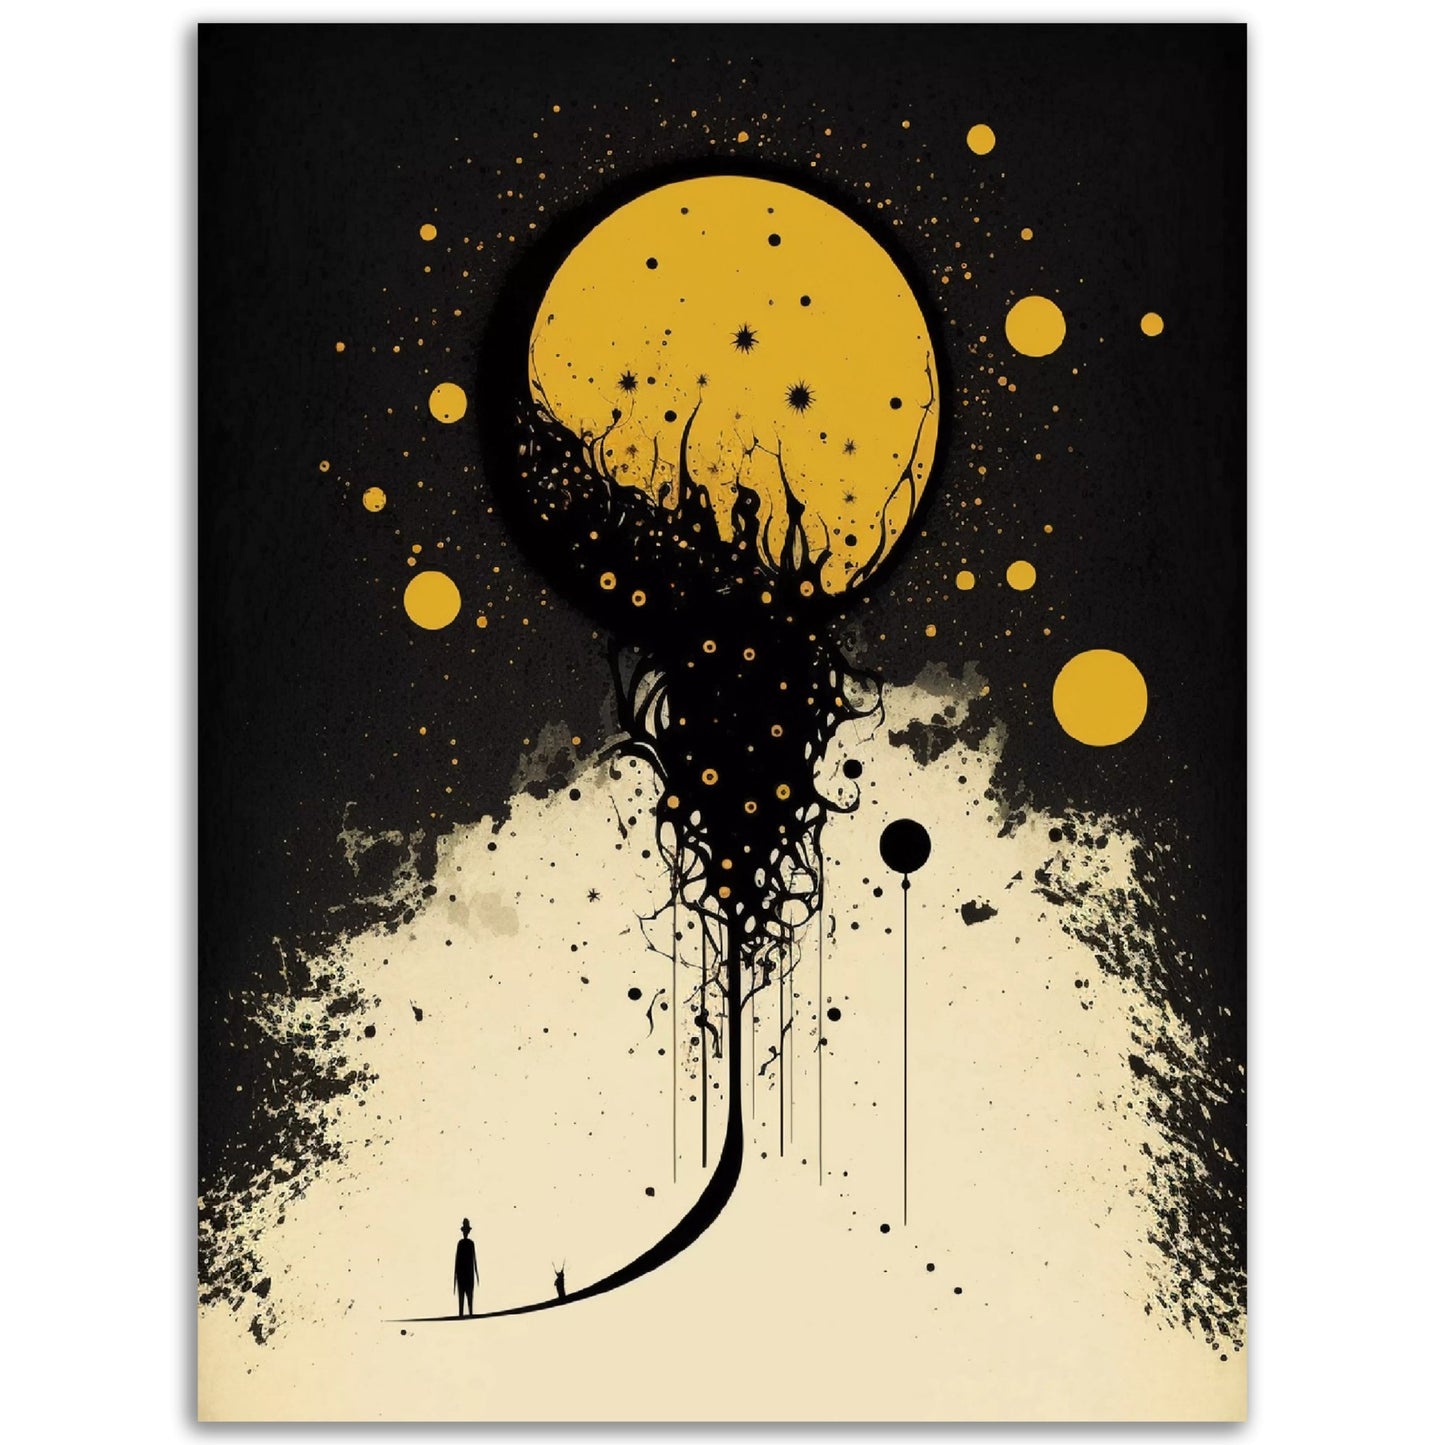 A high quality black and yellow Organic Growth To The Universe featuring an image of a tree and a moon. Perfect for adding colored wall art to any room.